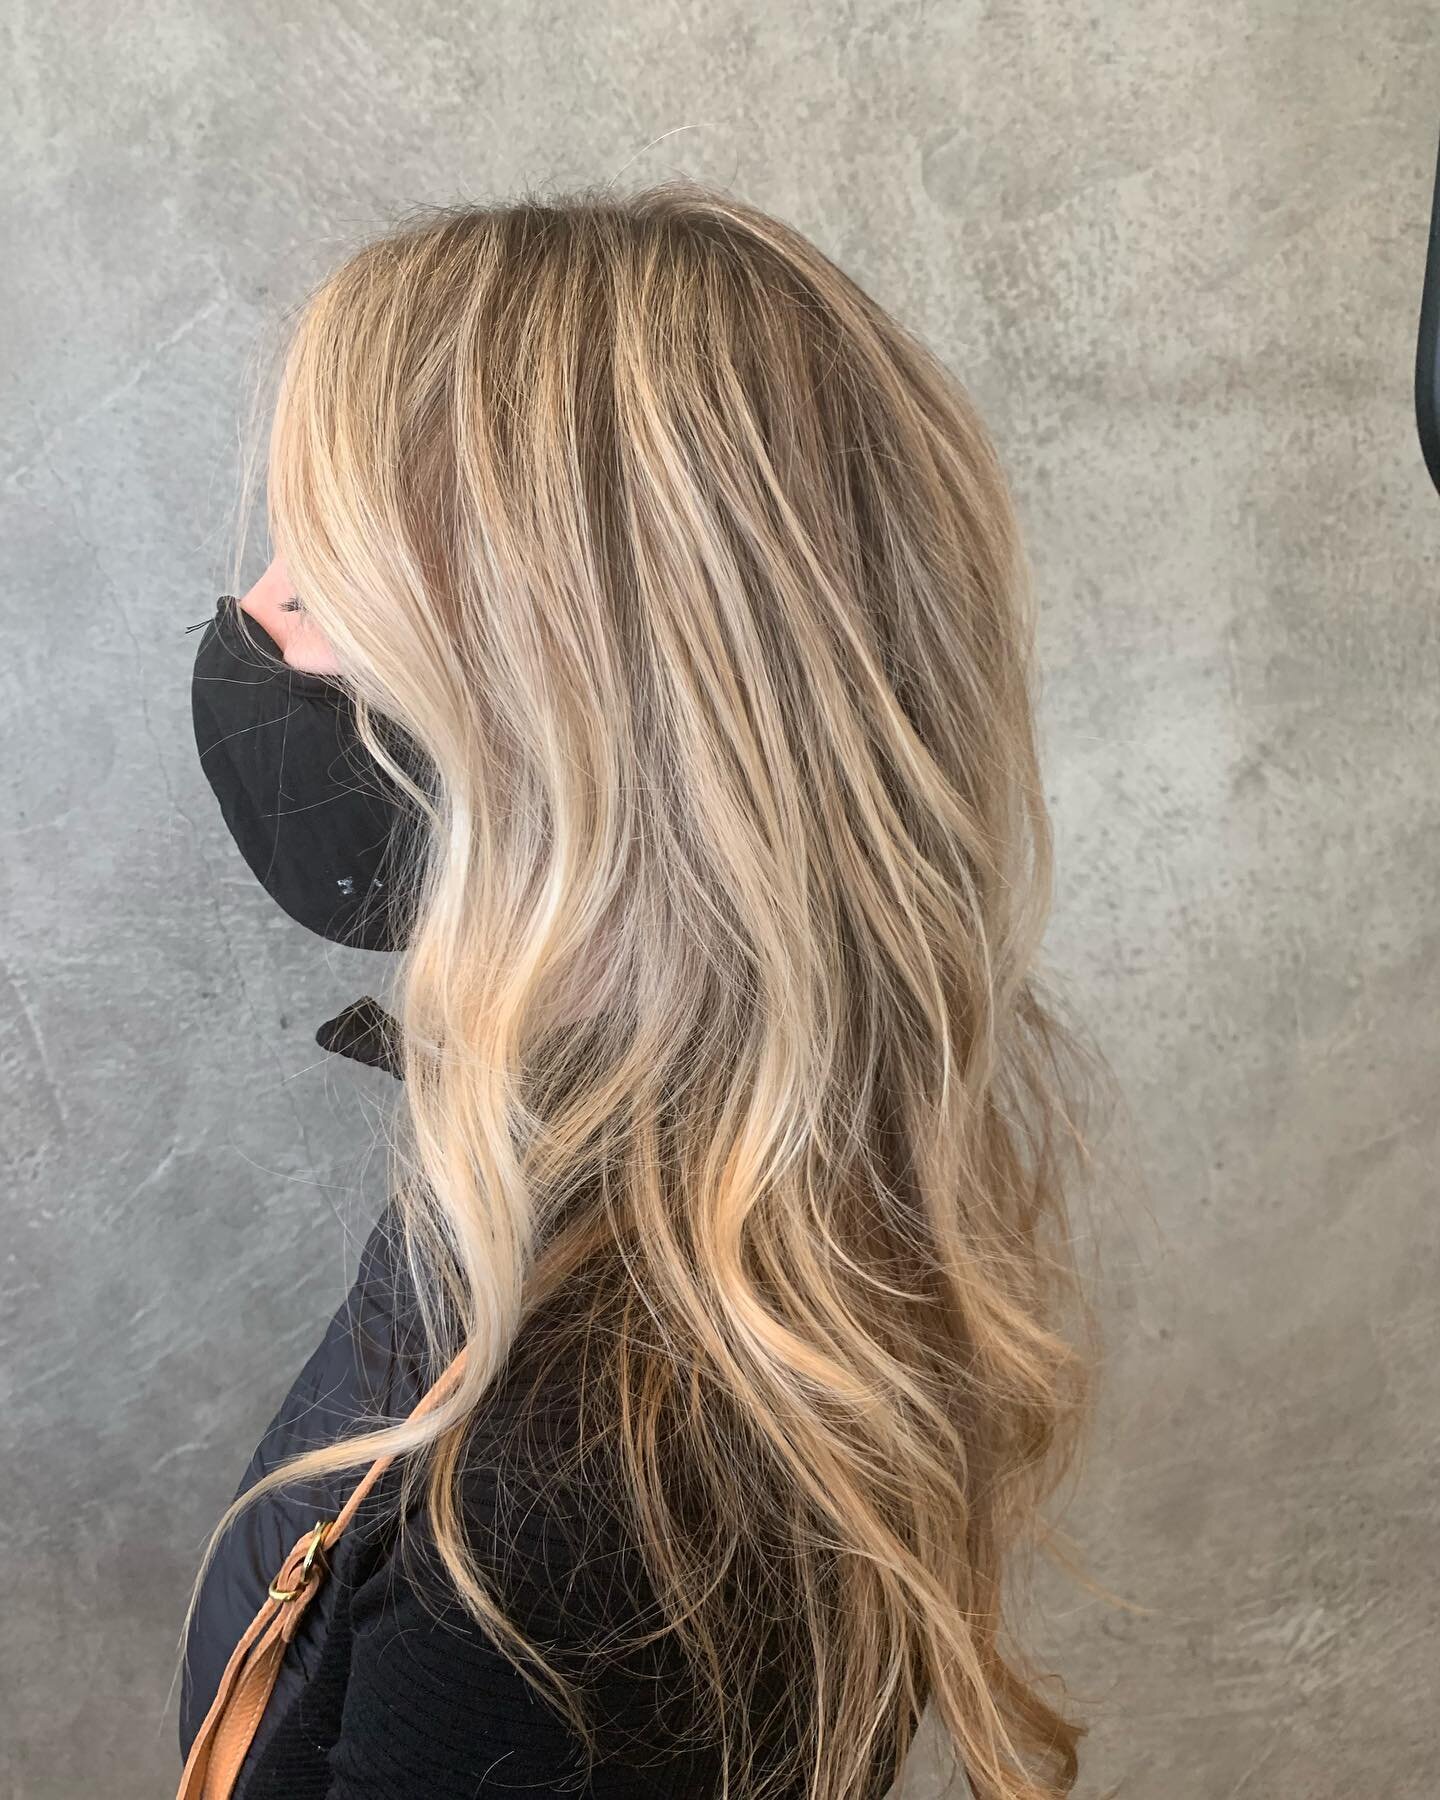 Pretty hair I made from last week &hearts;️ #balayage #blonde